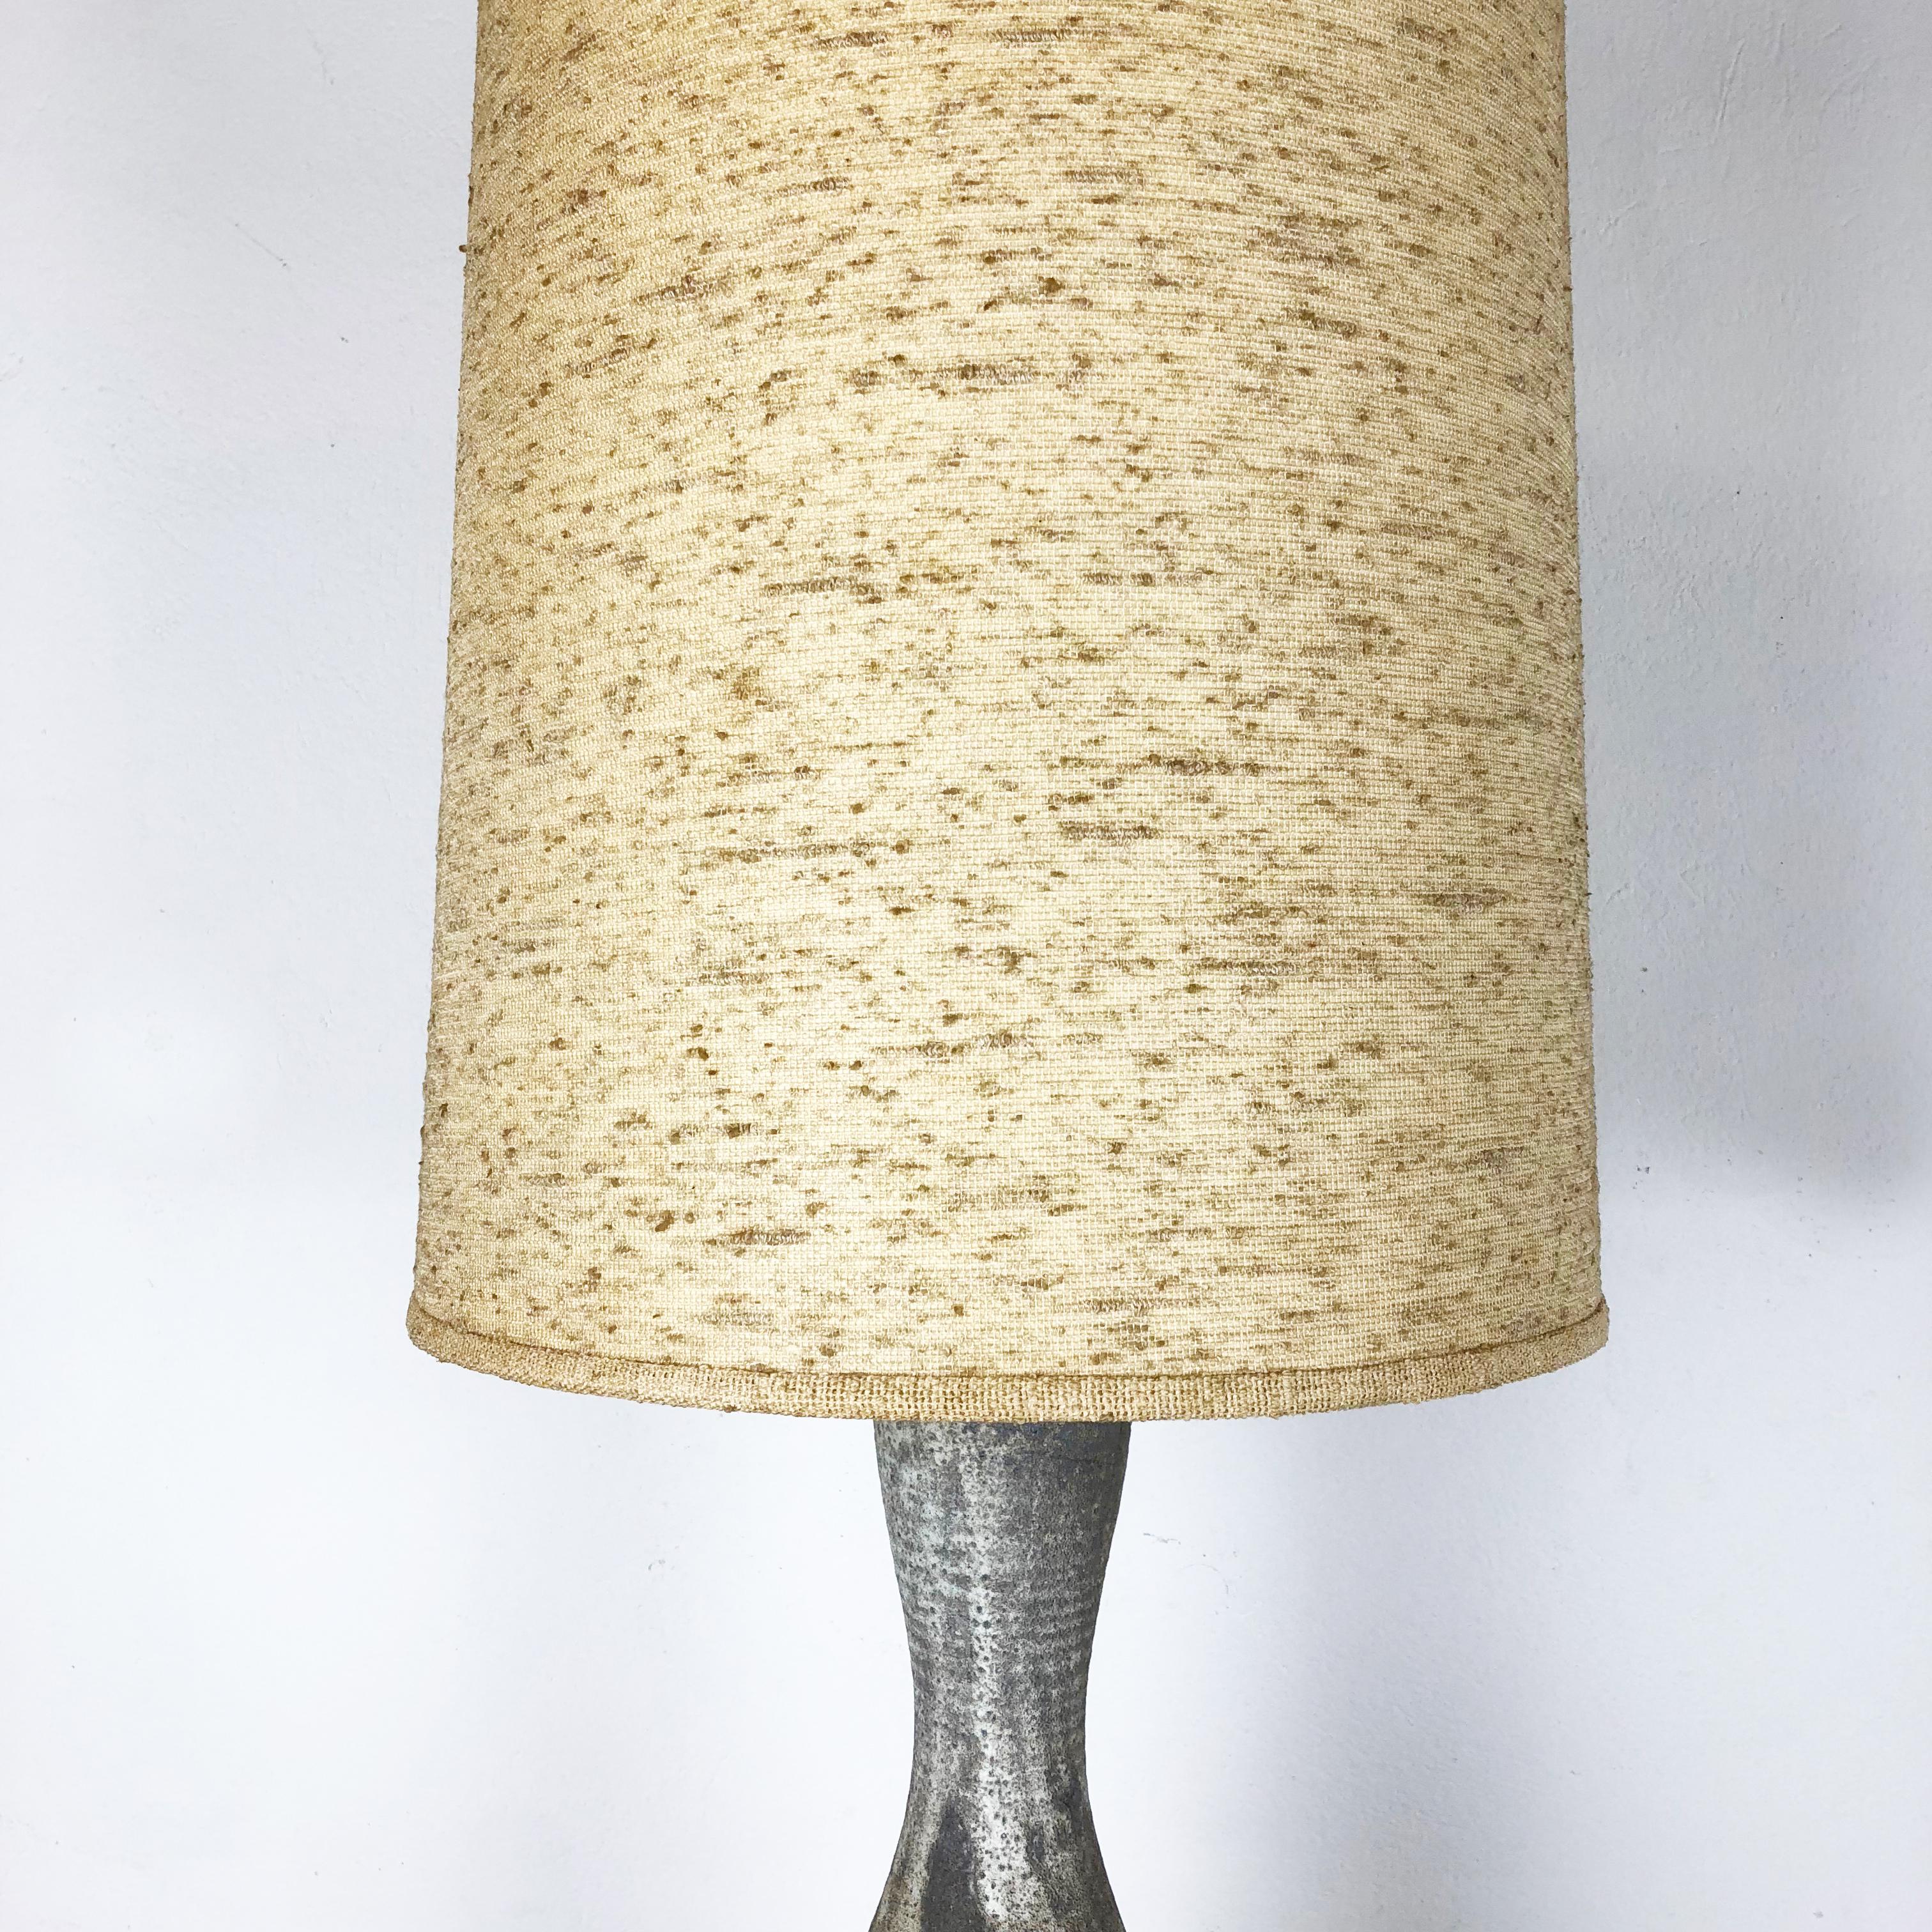 Ceramic Studio Pottery Table Light by Piet Knepper for Mobach, Netherlands 1960s 10